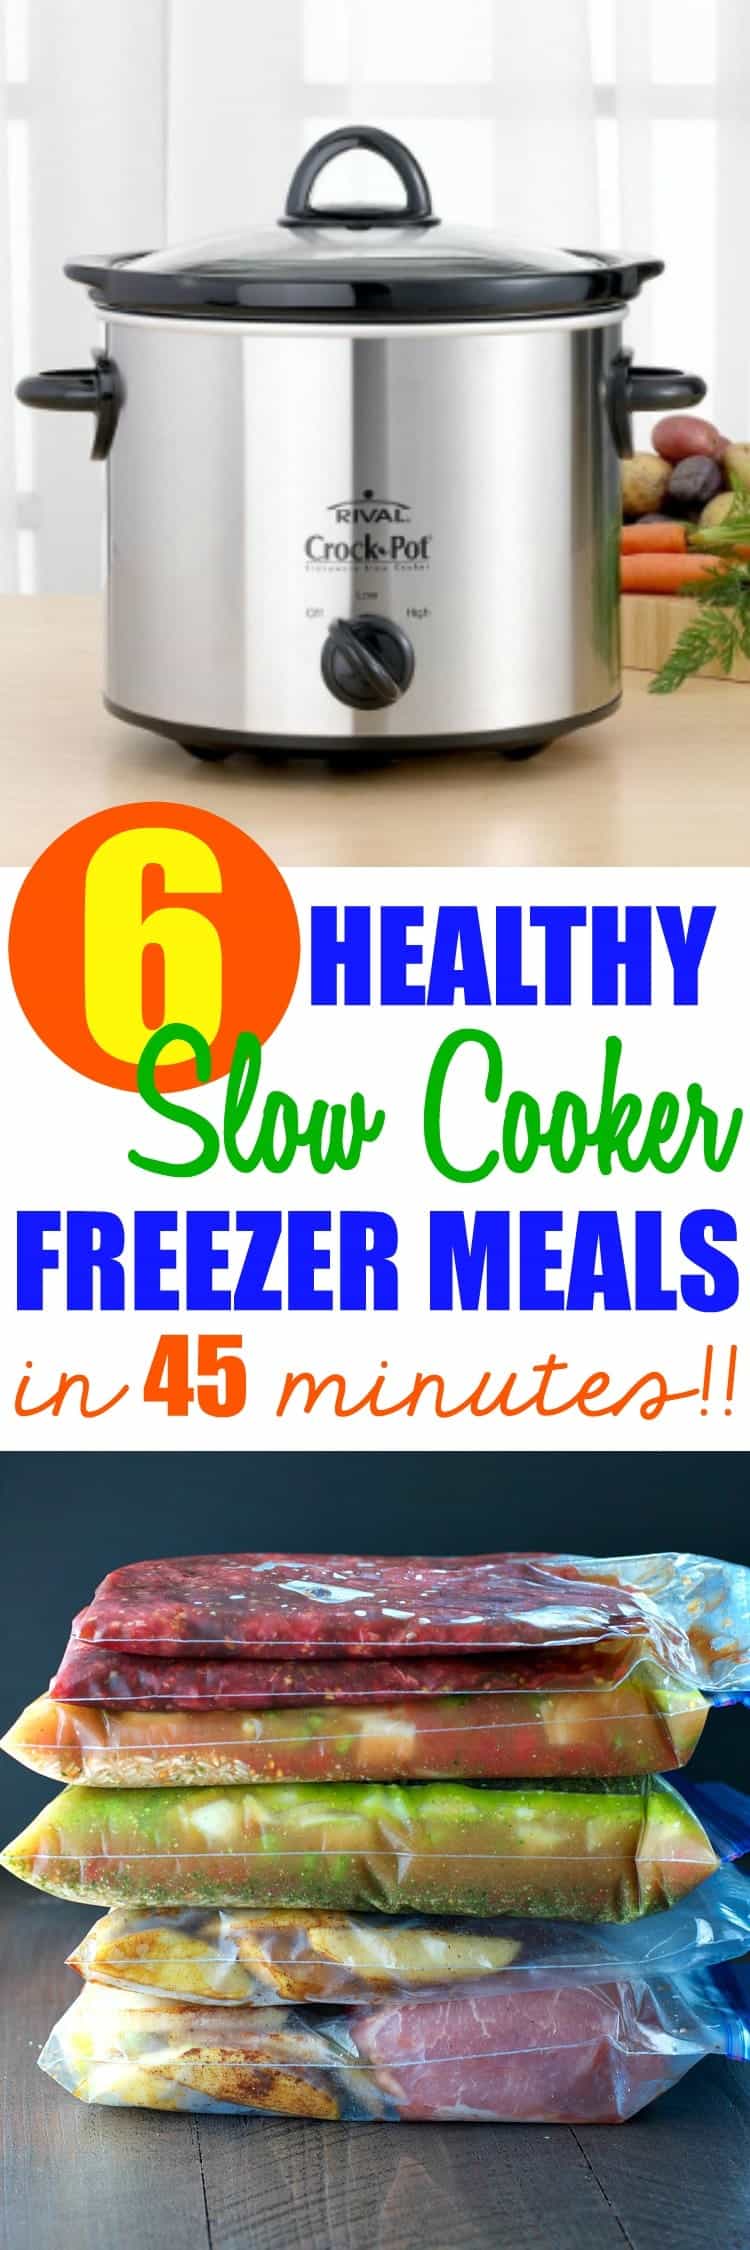 6 Healthy Slow Cooker Freezer Meals in 45 Minutes - The Seasoned Mom